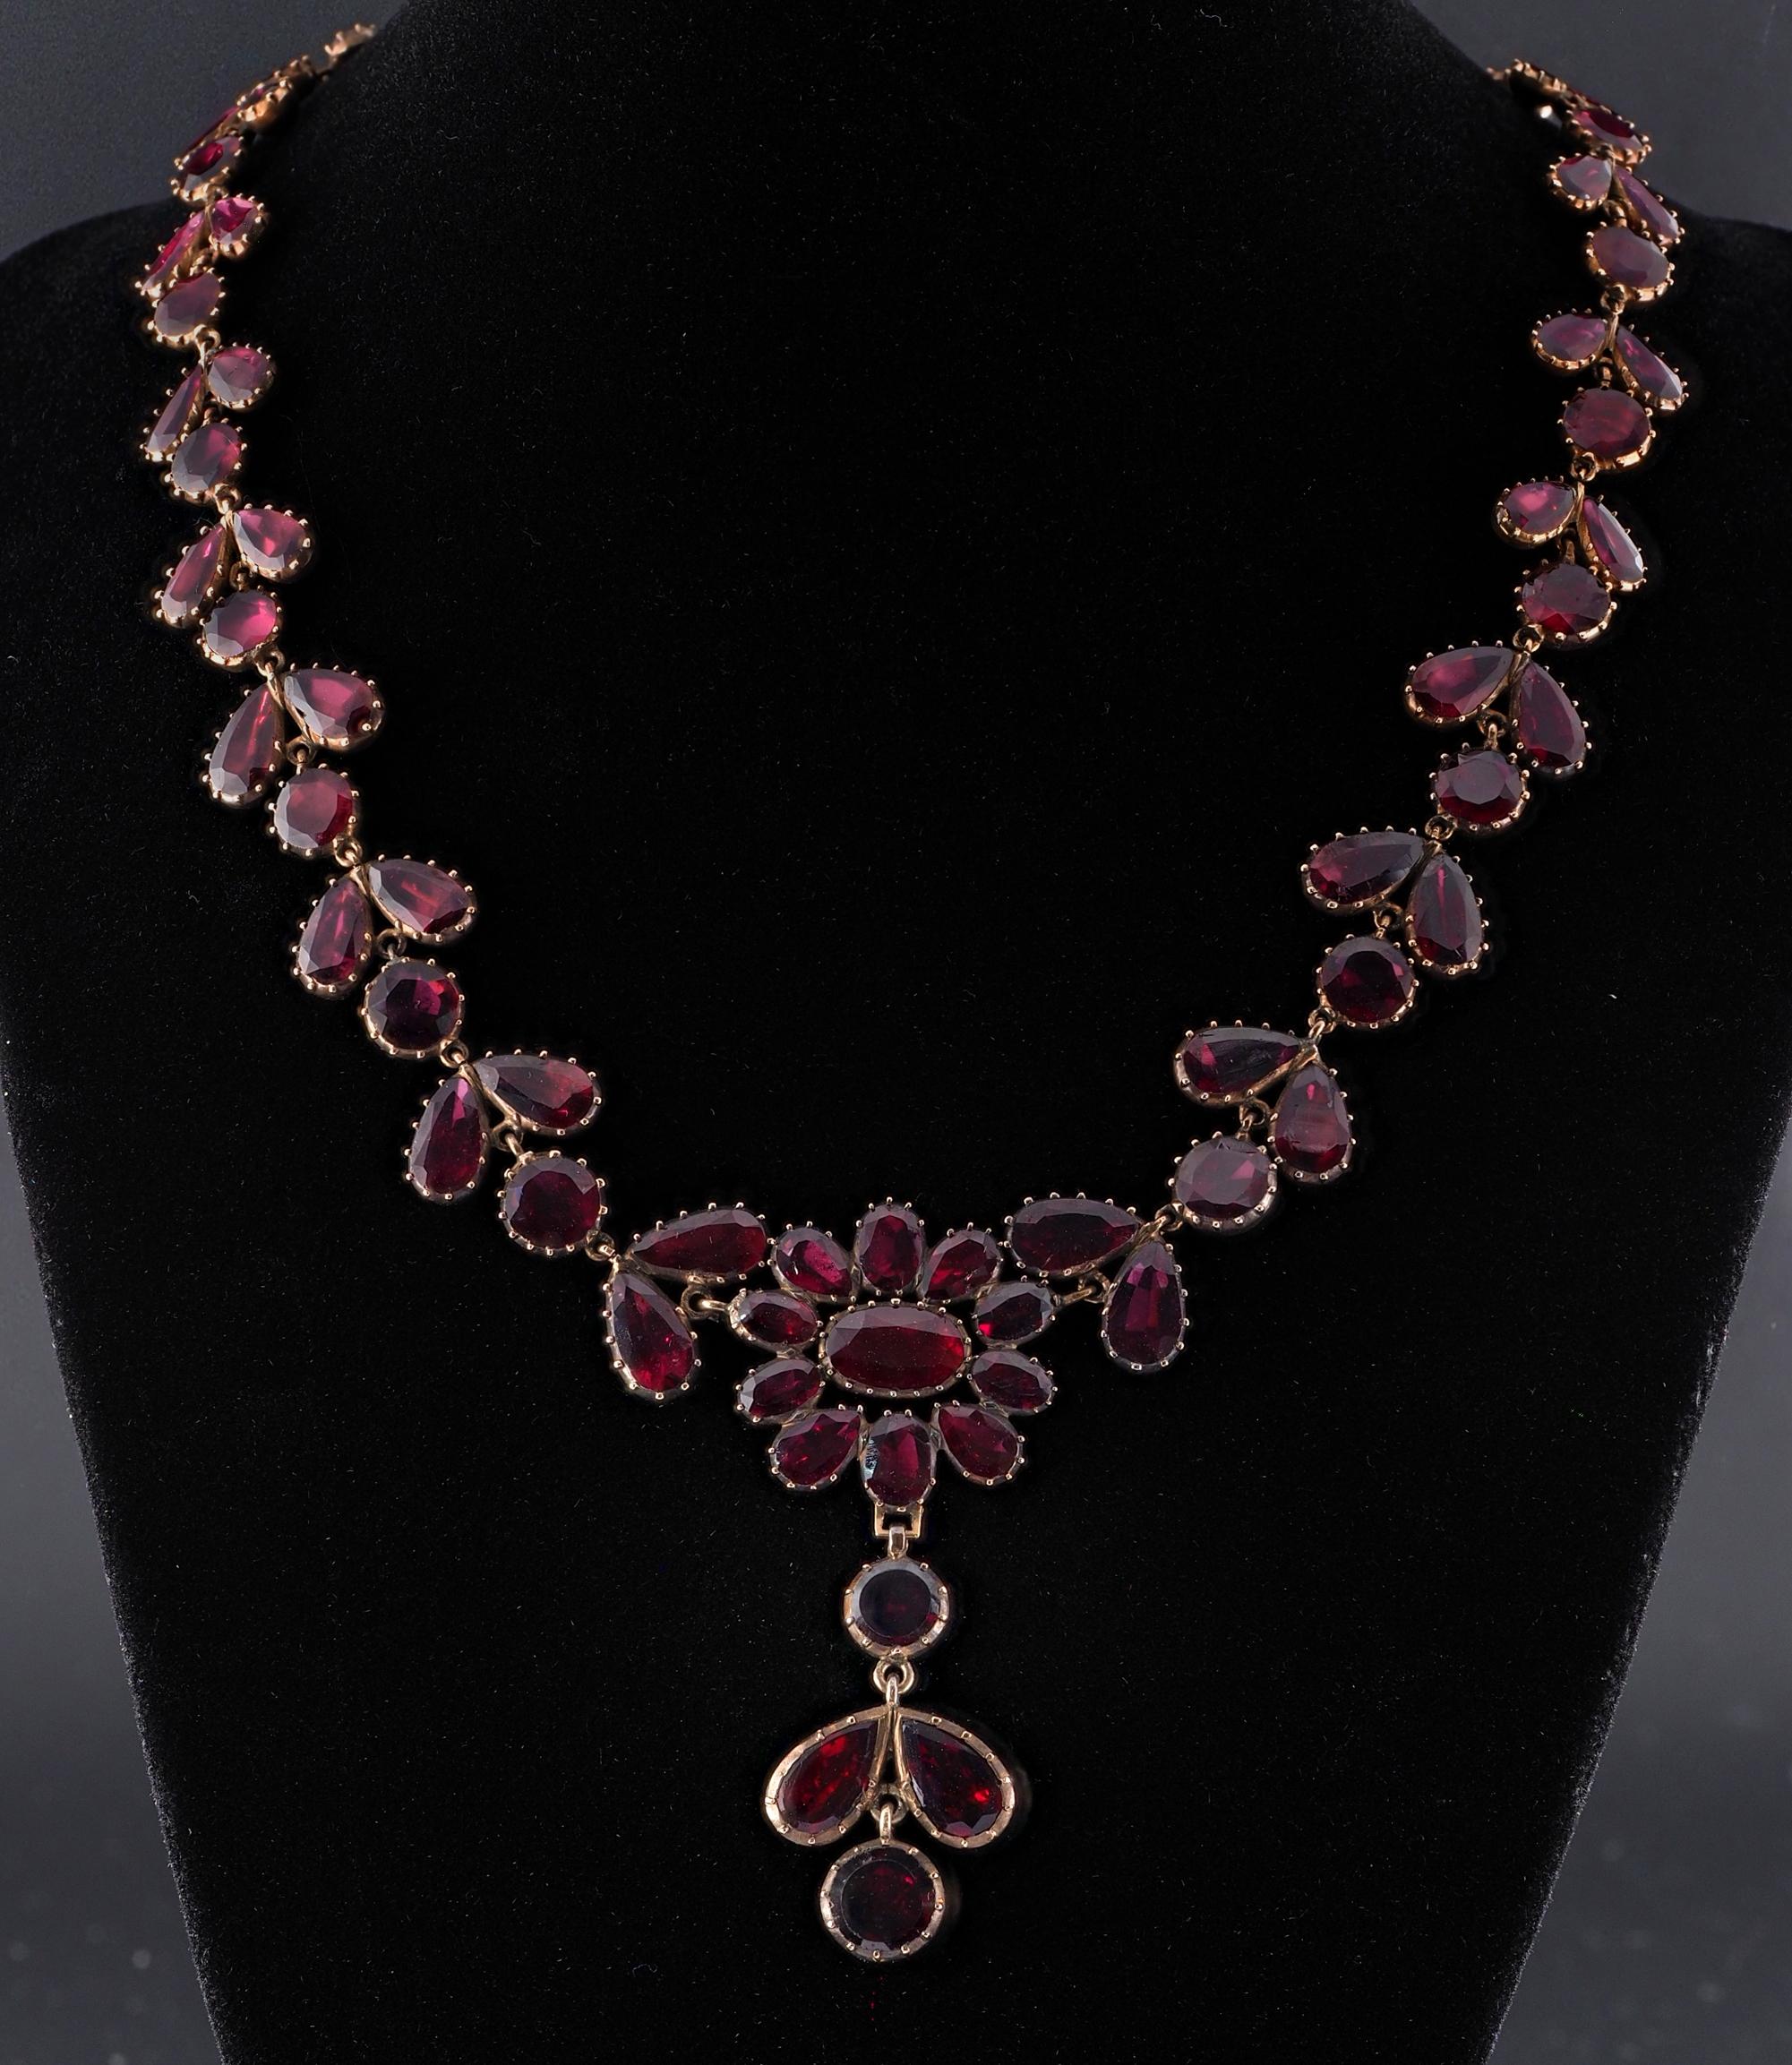 Red Garnet Love
Antique Georgian period, 1800 ca, beautiful necklace made during the time of solid 12 Kt gold
Comprising a riviere necklace with a centrepiece in the shape of a flower with suspended finial, close back setting as for Georgian